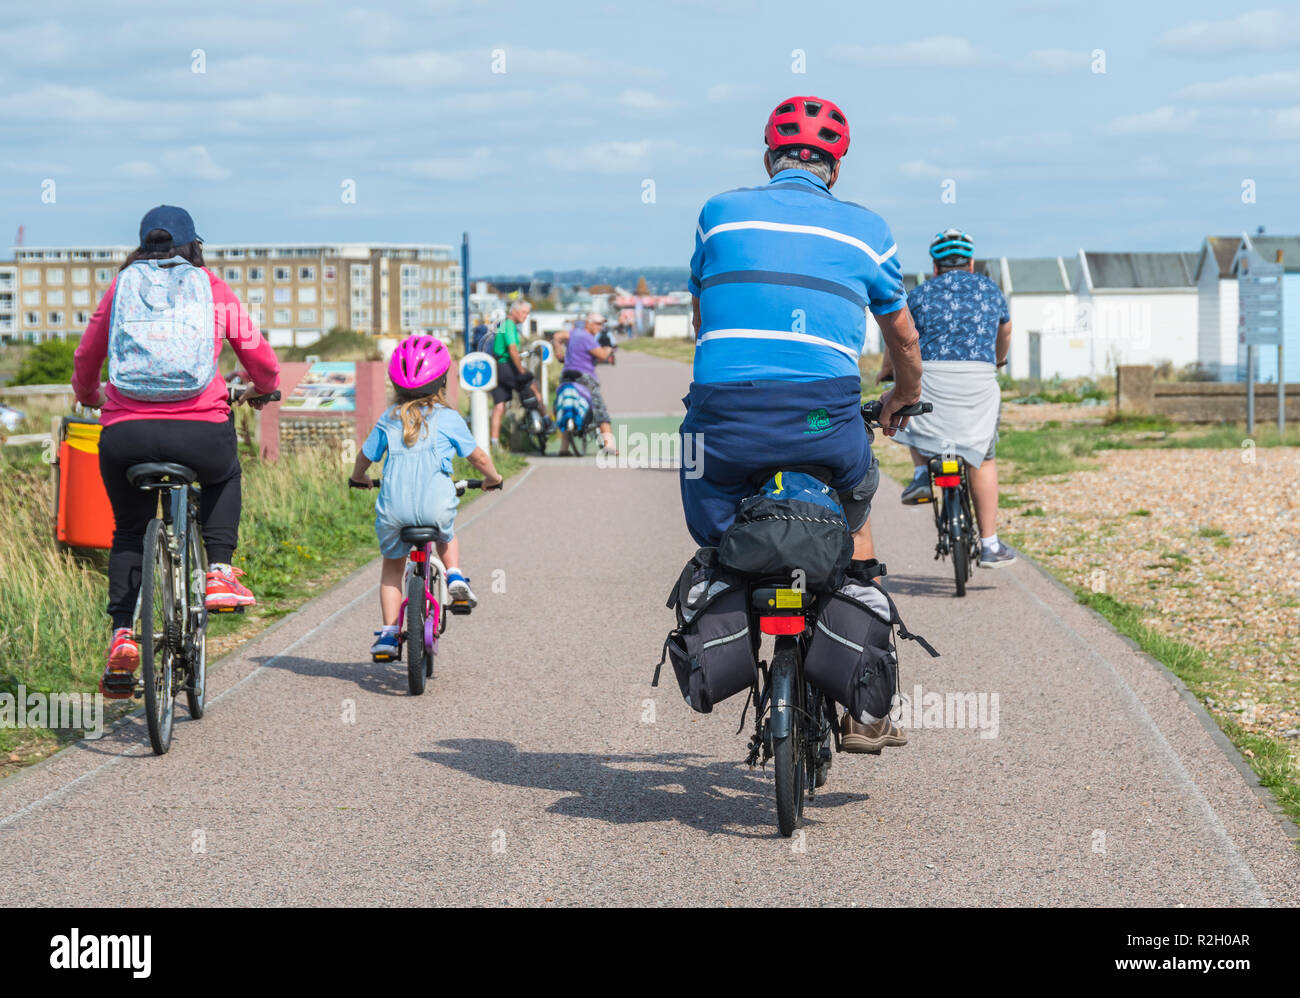 A family cycling along a promenade path for pedestrians and cyclists in Summer in the UK. Stock Photo